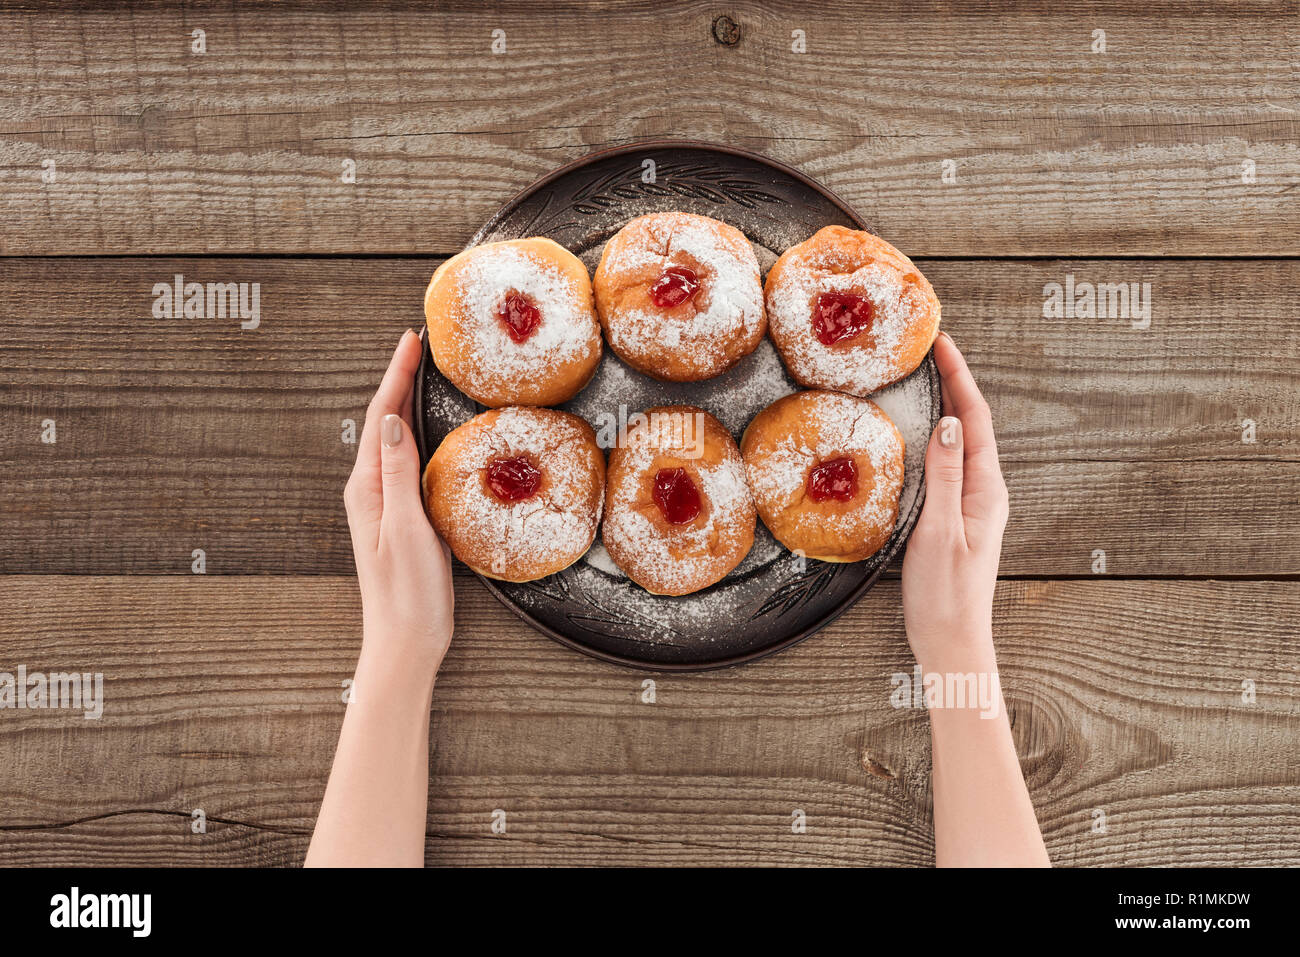 partial view of woman holding plate with sweet doughnuts hannukah traditional food on wooden surface, hannukah concept Stock Photo